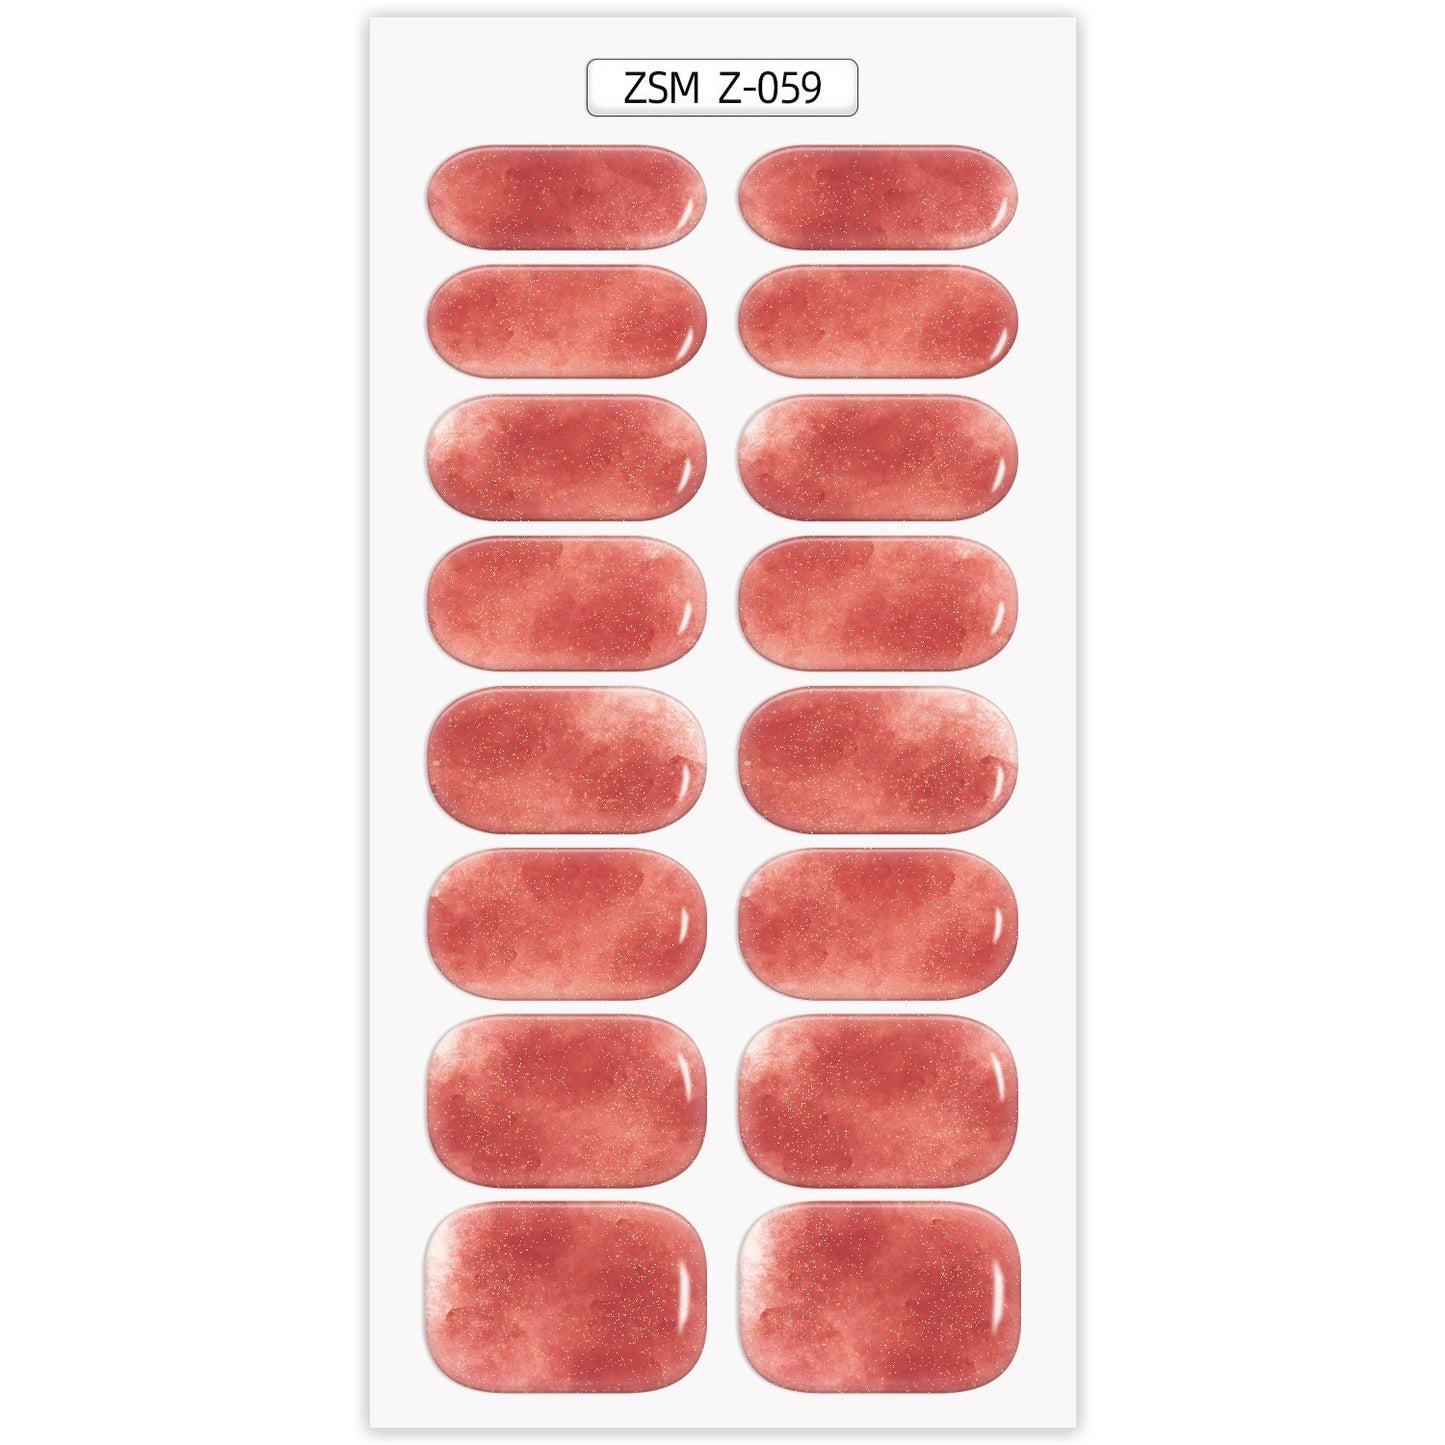 Gel Nail Art Stickers (Halo), Semi Cure Gel Nail Strips (16pcs), Real Nail Polish Art Stickers, Sticker Decoration Includes Preparation Pads, Nail Files and Wooden Sticks, Suitable for Women, Girls